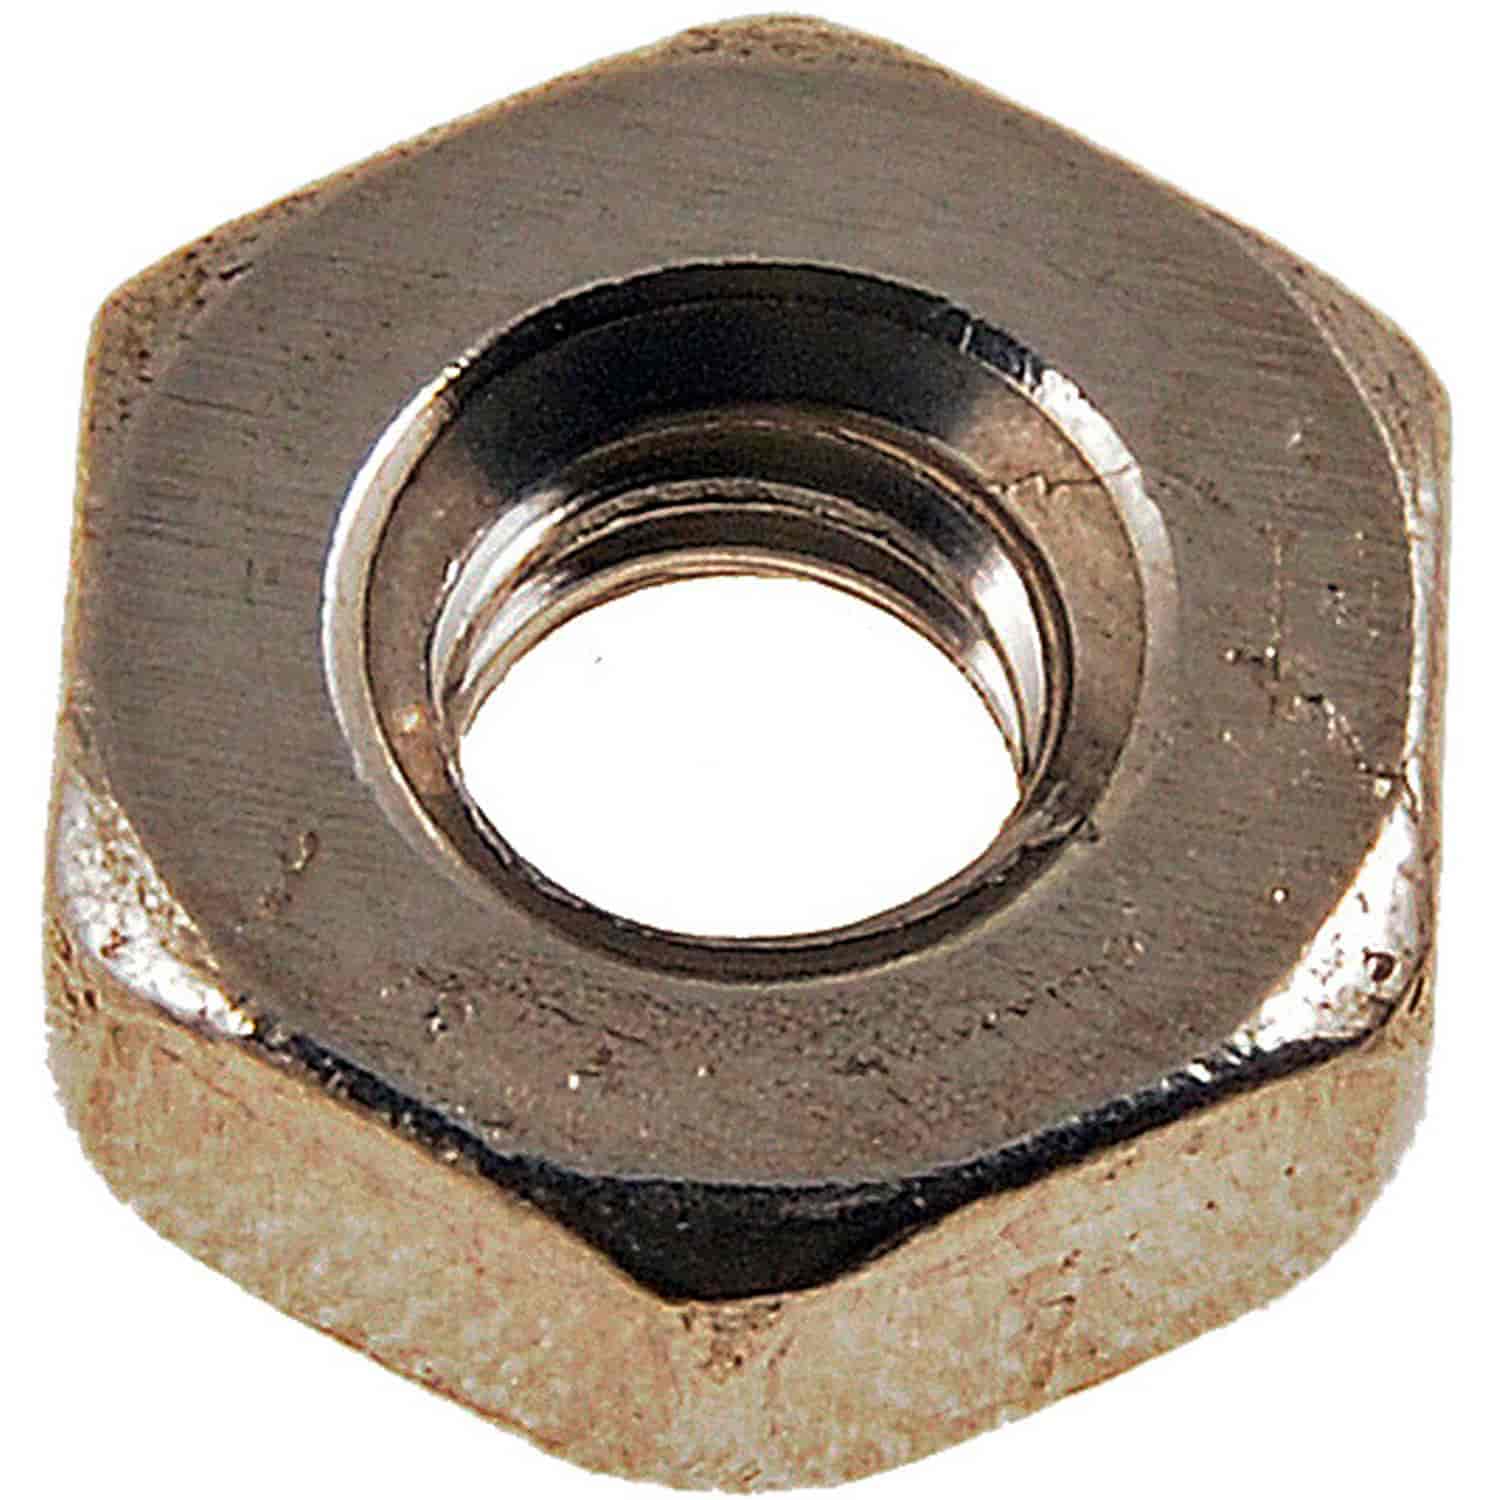 Hex Nut-Stainless Steel- Thread Size 8-32